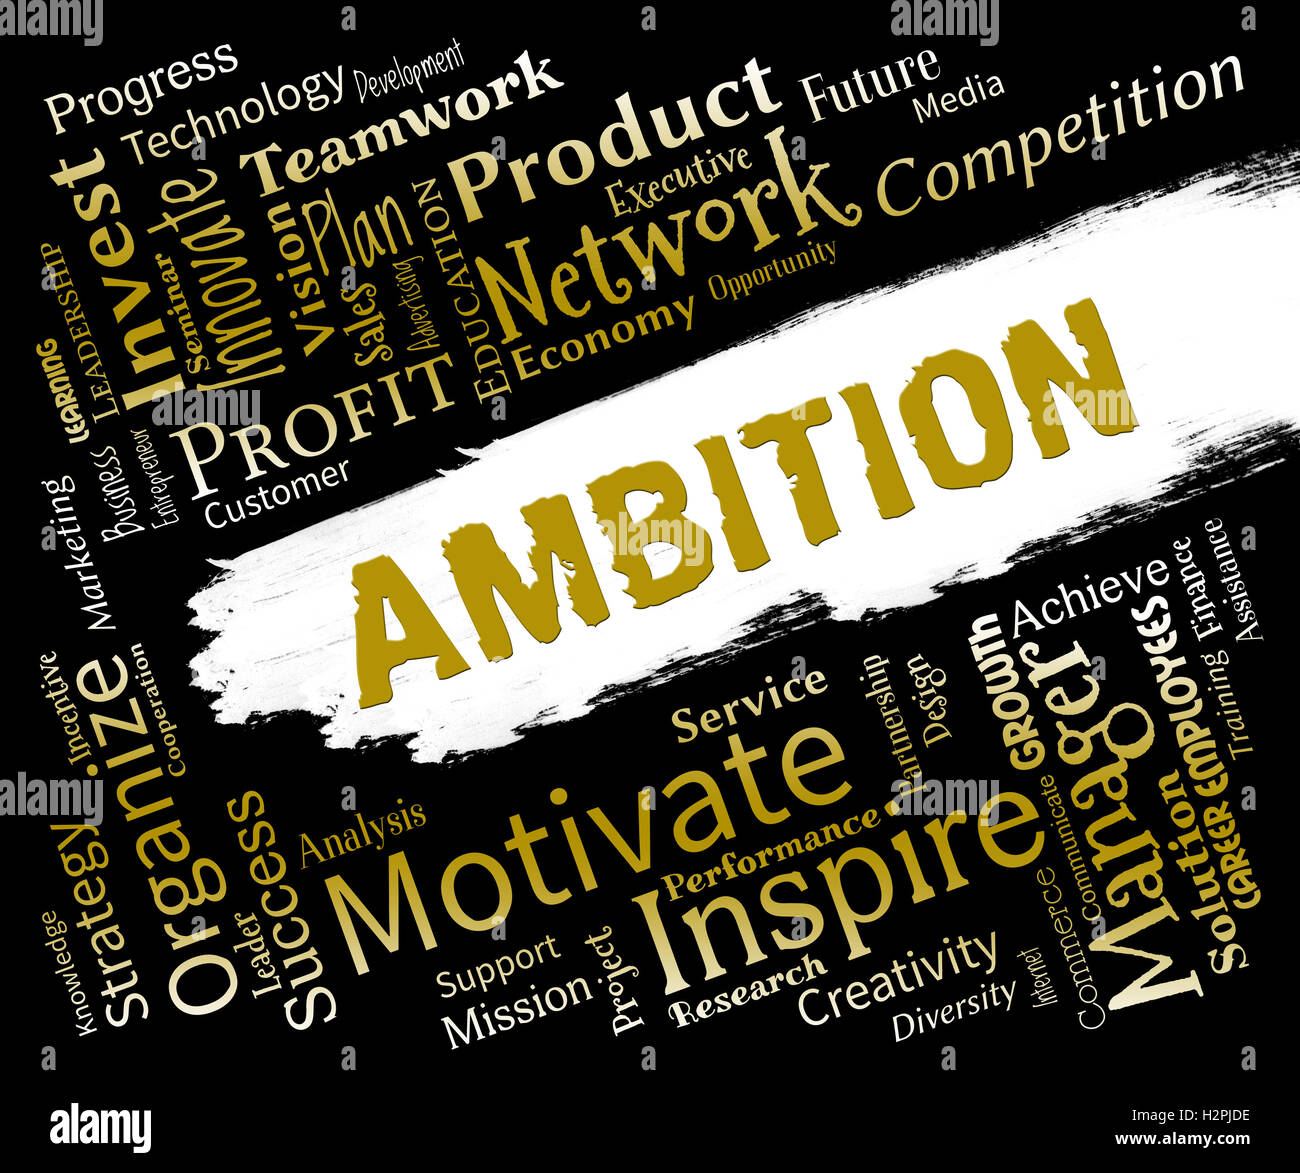 Ambition Words Showing Aims Dreams And Targets Stock Photo